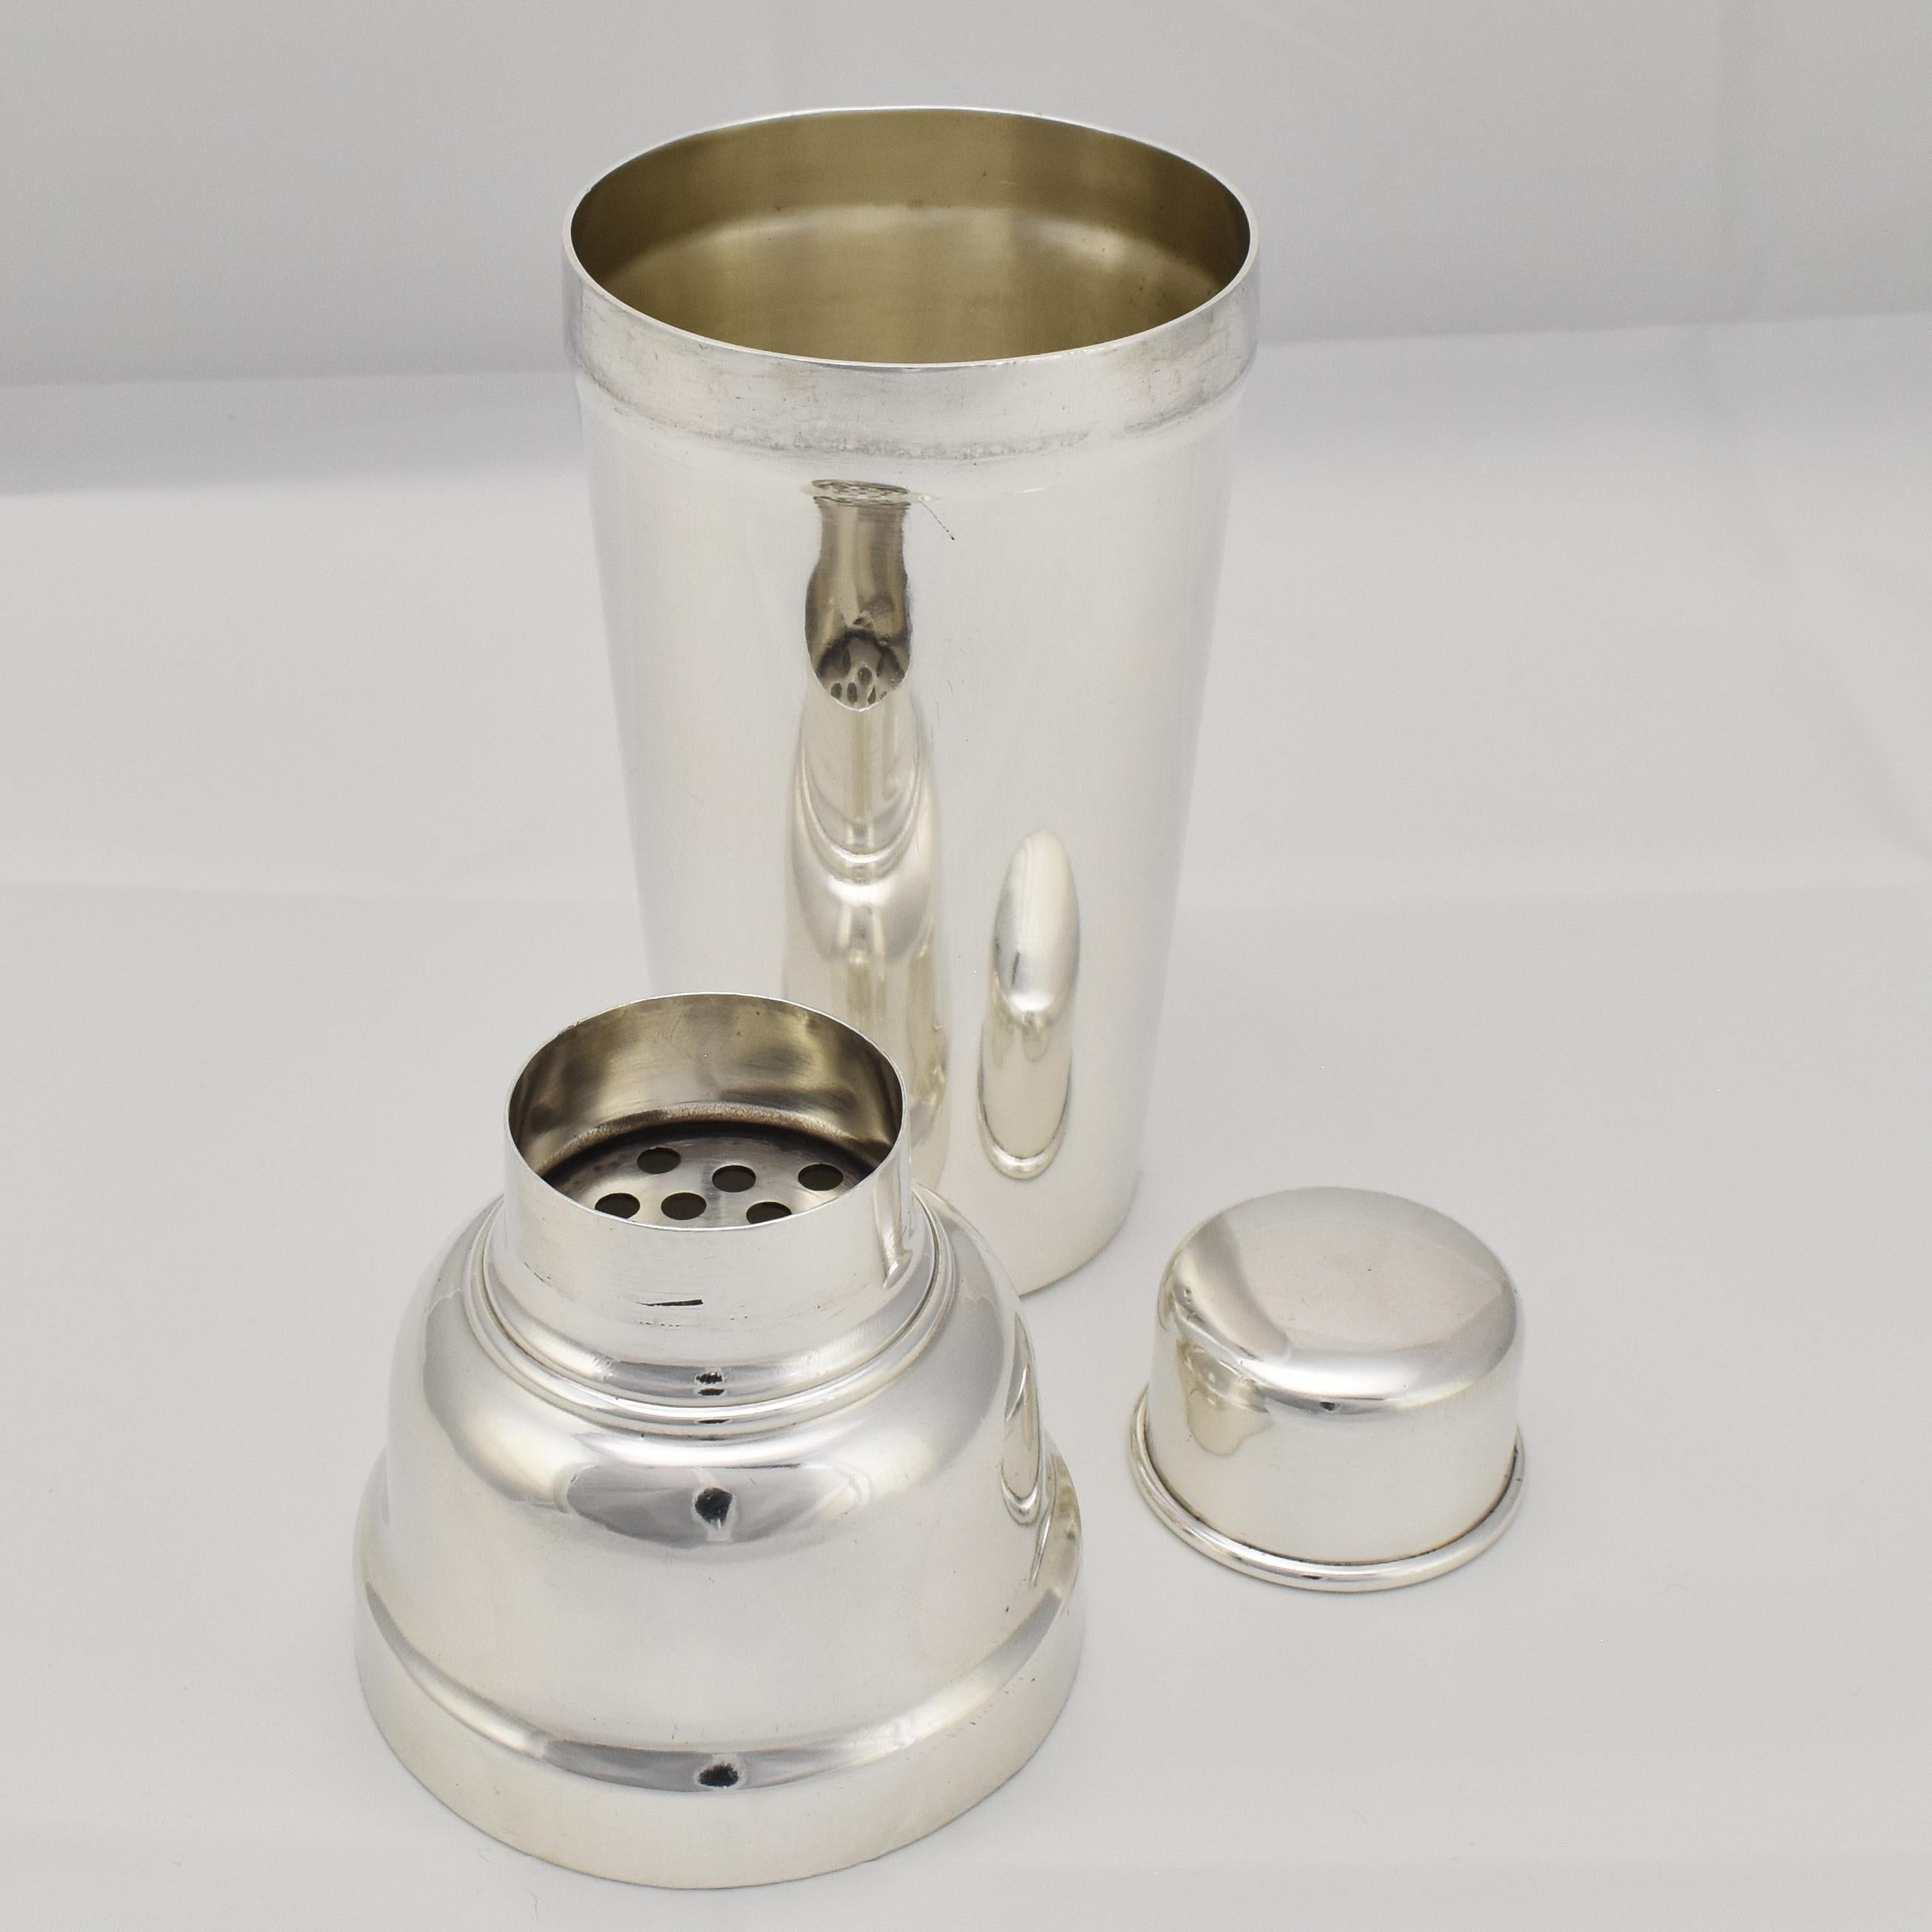 Mid-20th Century Art Deco Cocktail Martini Shaker Silverplate by Christofle Paris For Sale